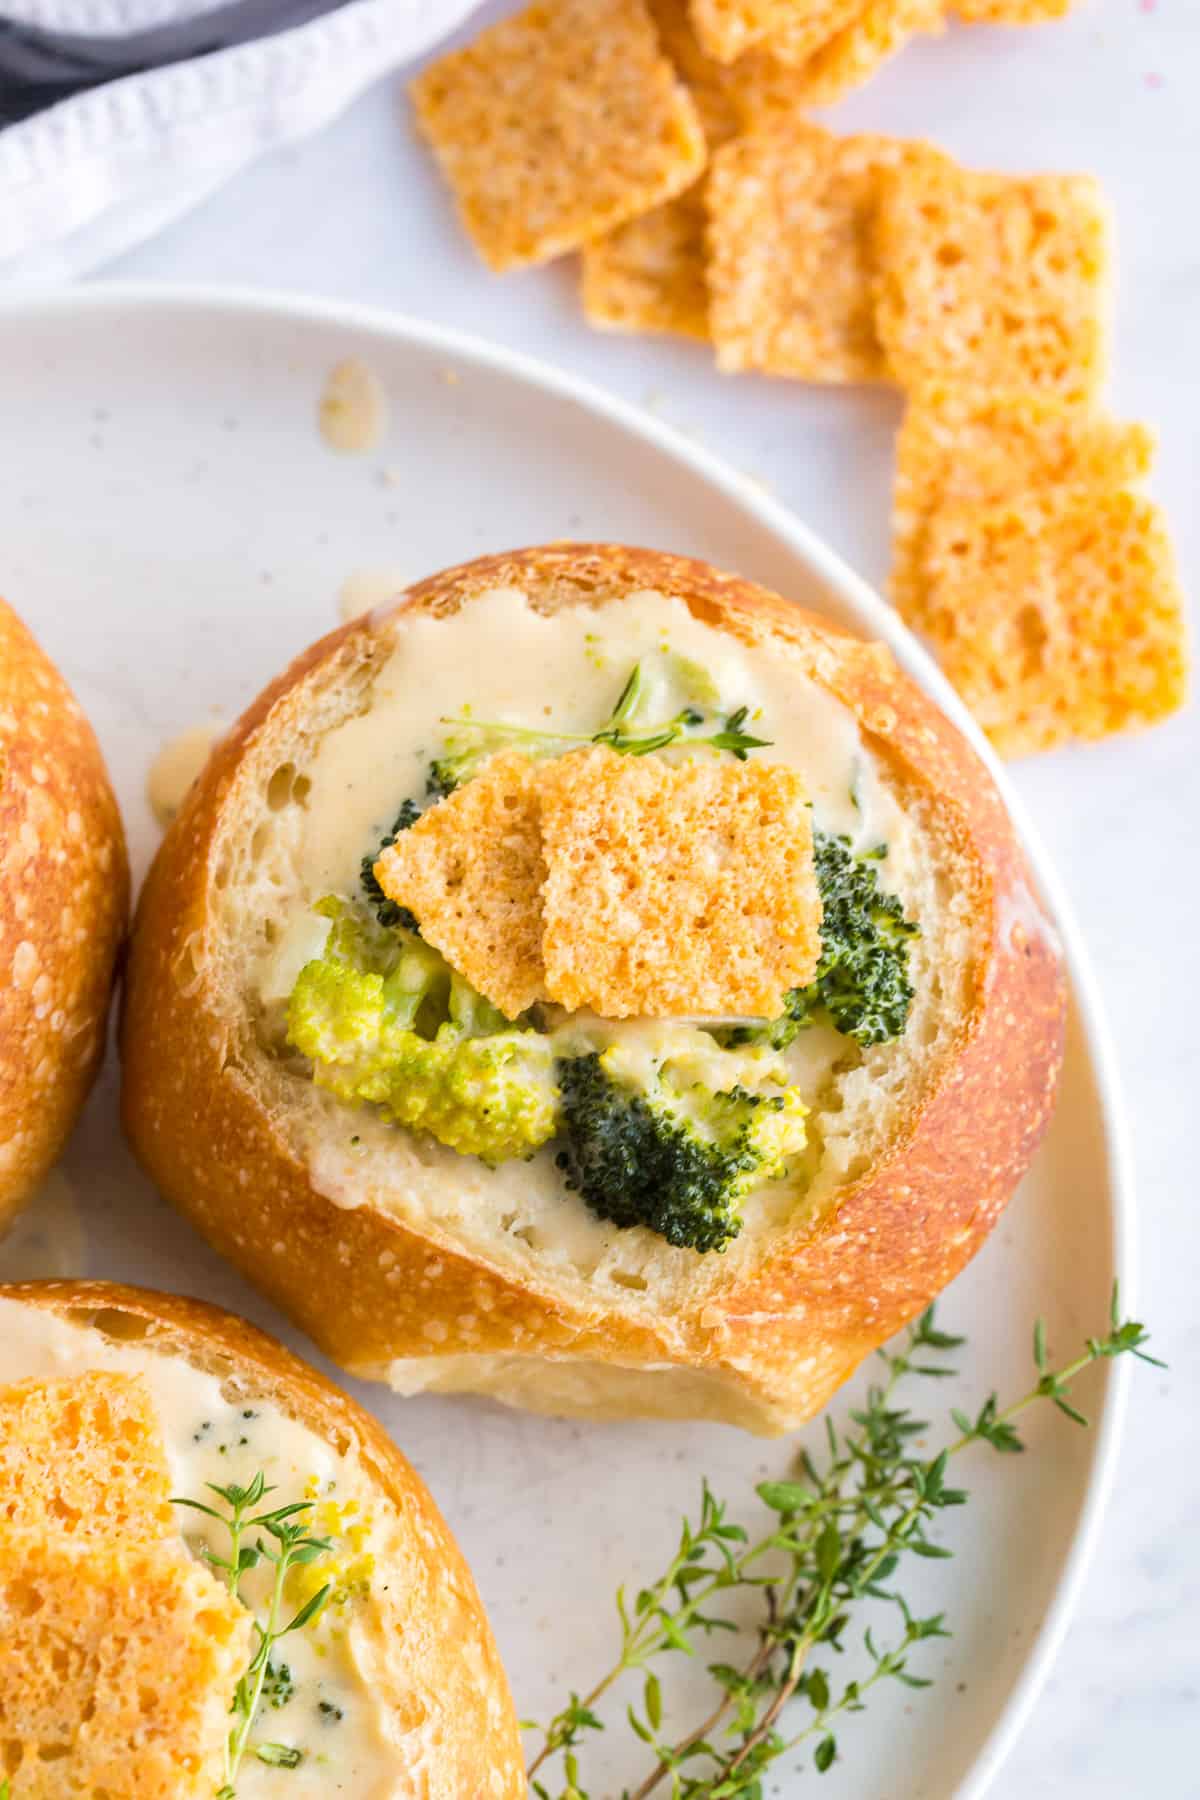 crackers made of baked cheddar cheese topping a creamy broccoli soup